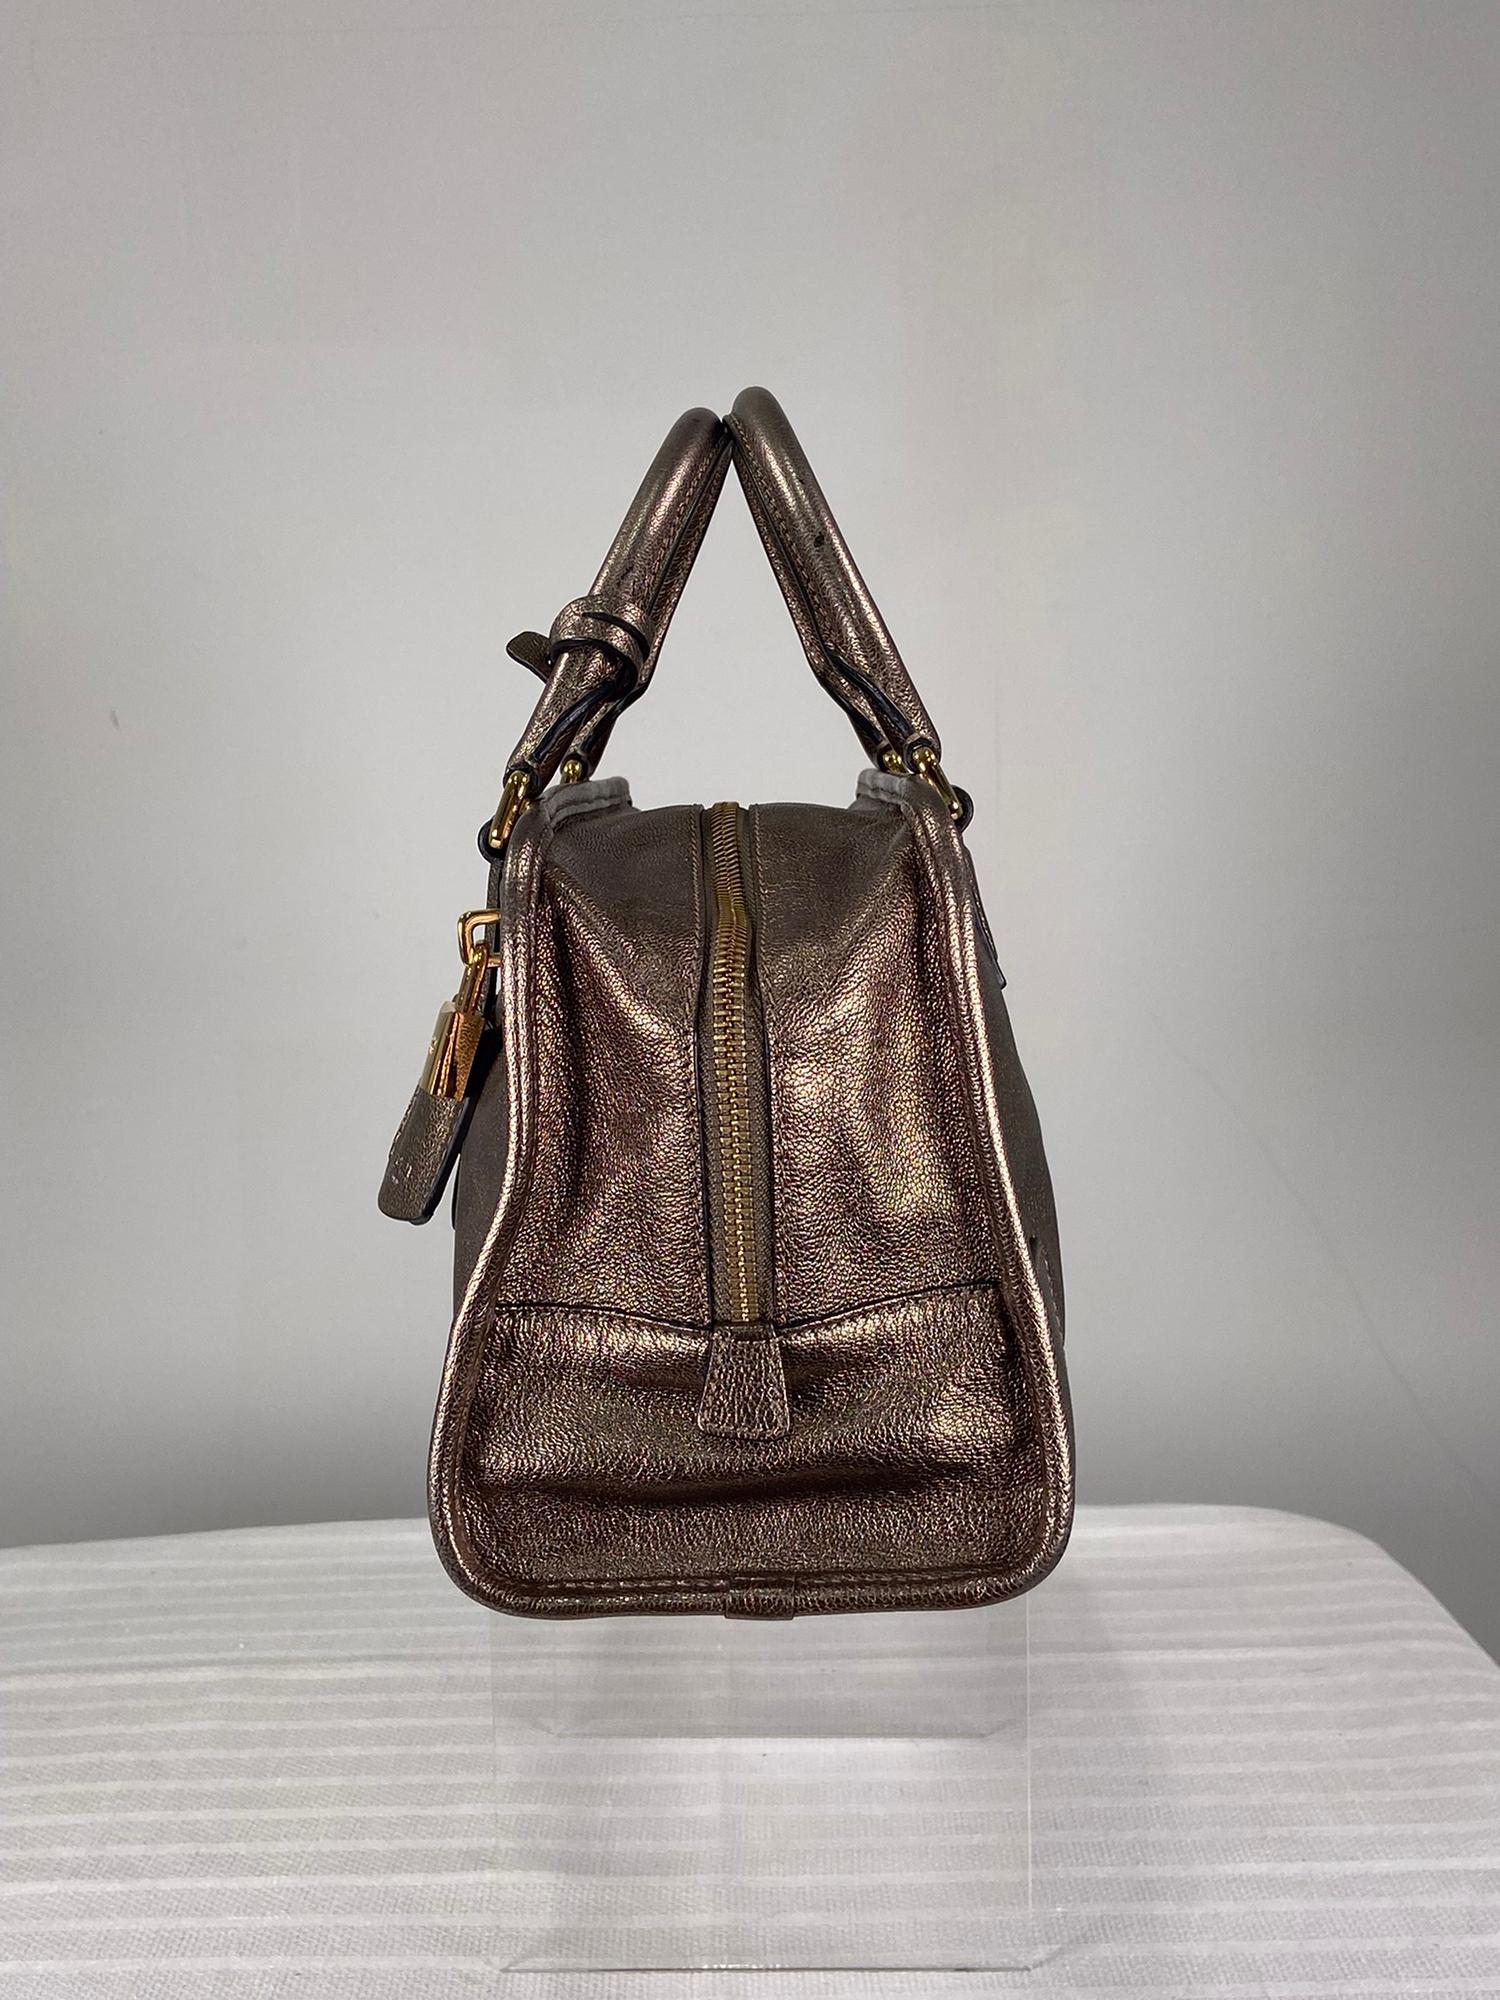 Loewe Amazona bronze goatskin handbag. Beautiful bronze metallic soft goat skin leather bag, the front features a raised logo applique, rolled leather welt around the edges. Double rolled handles with gold hardware. Lock and key cloche, zipper